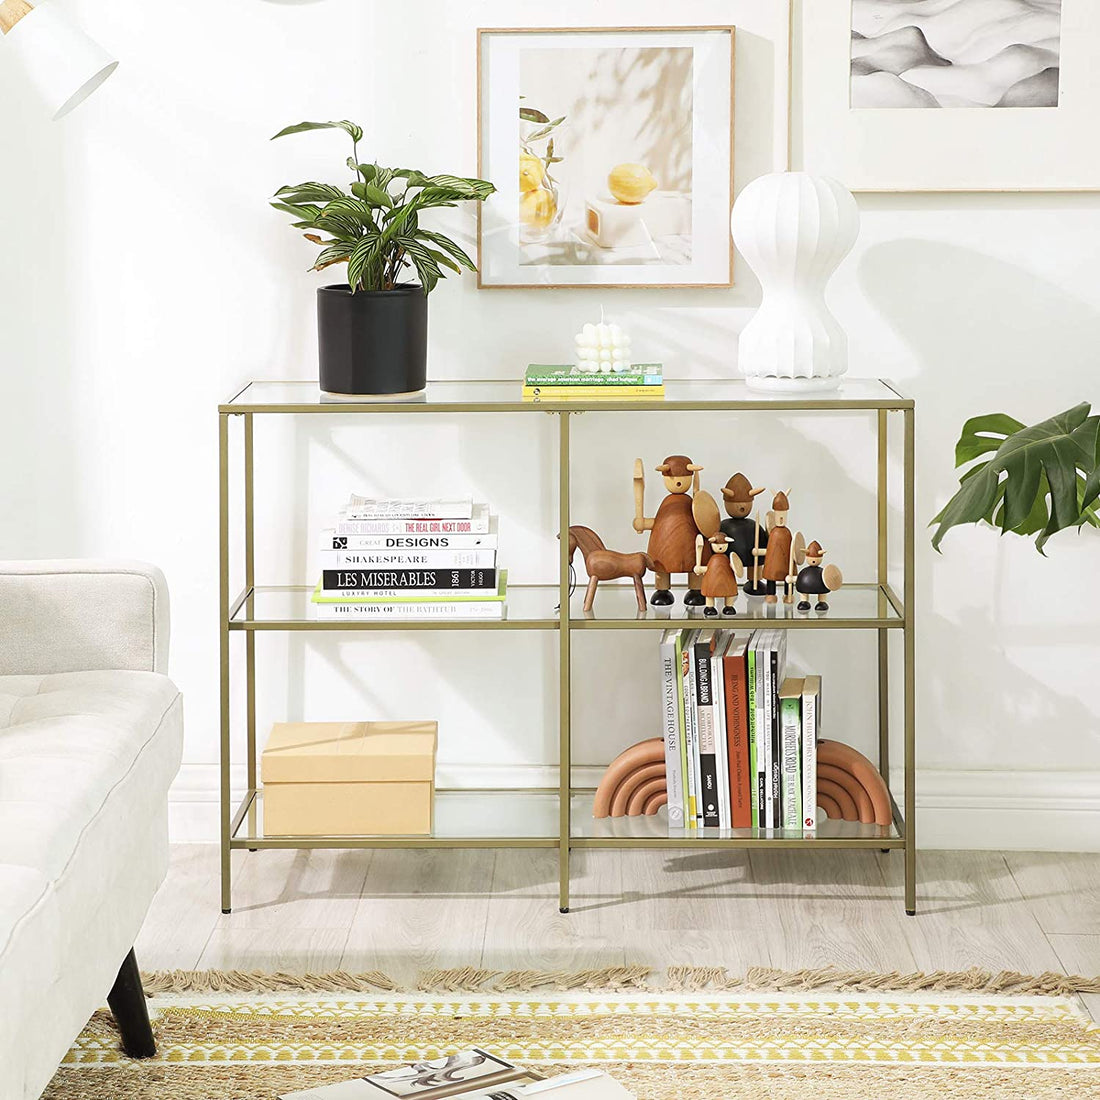 Sofa Console Table with 3 Shelves